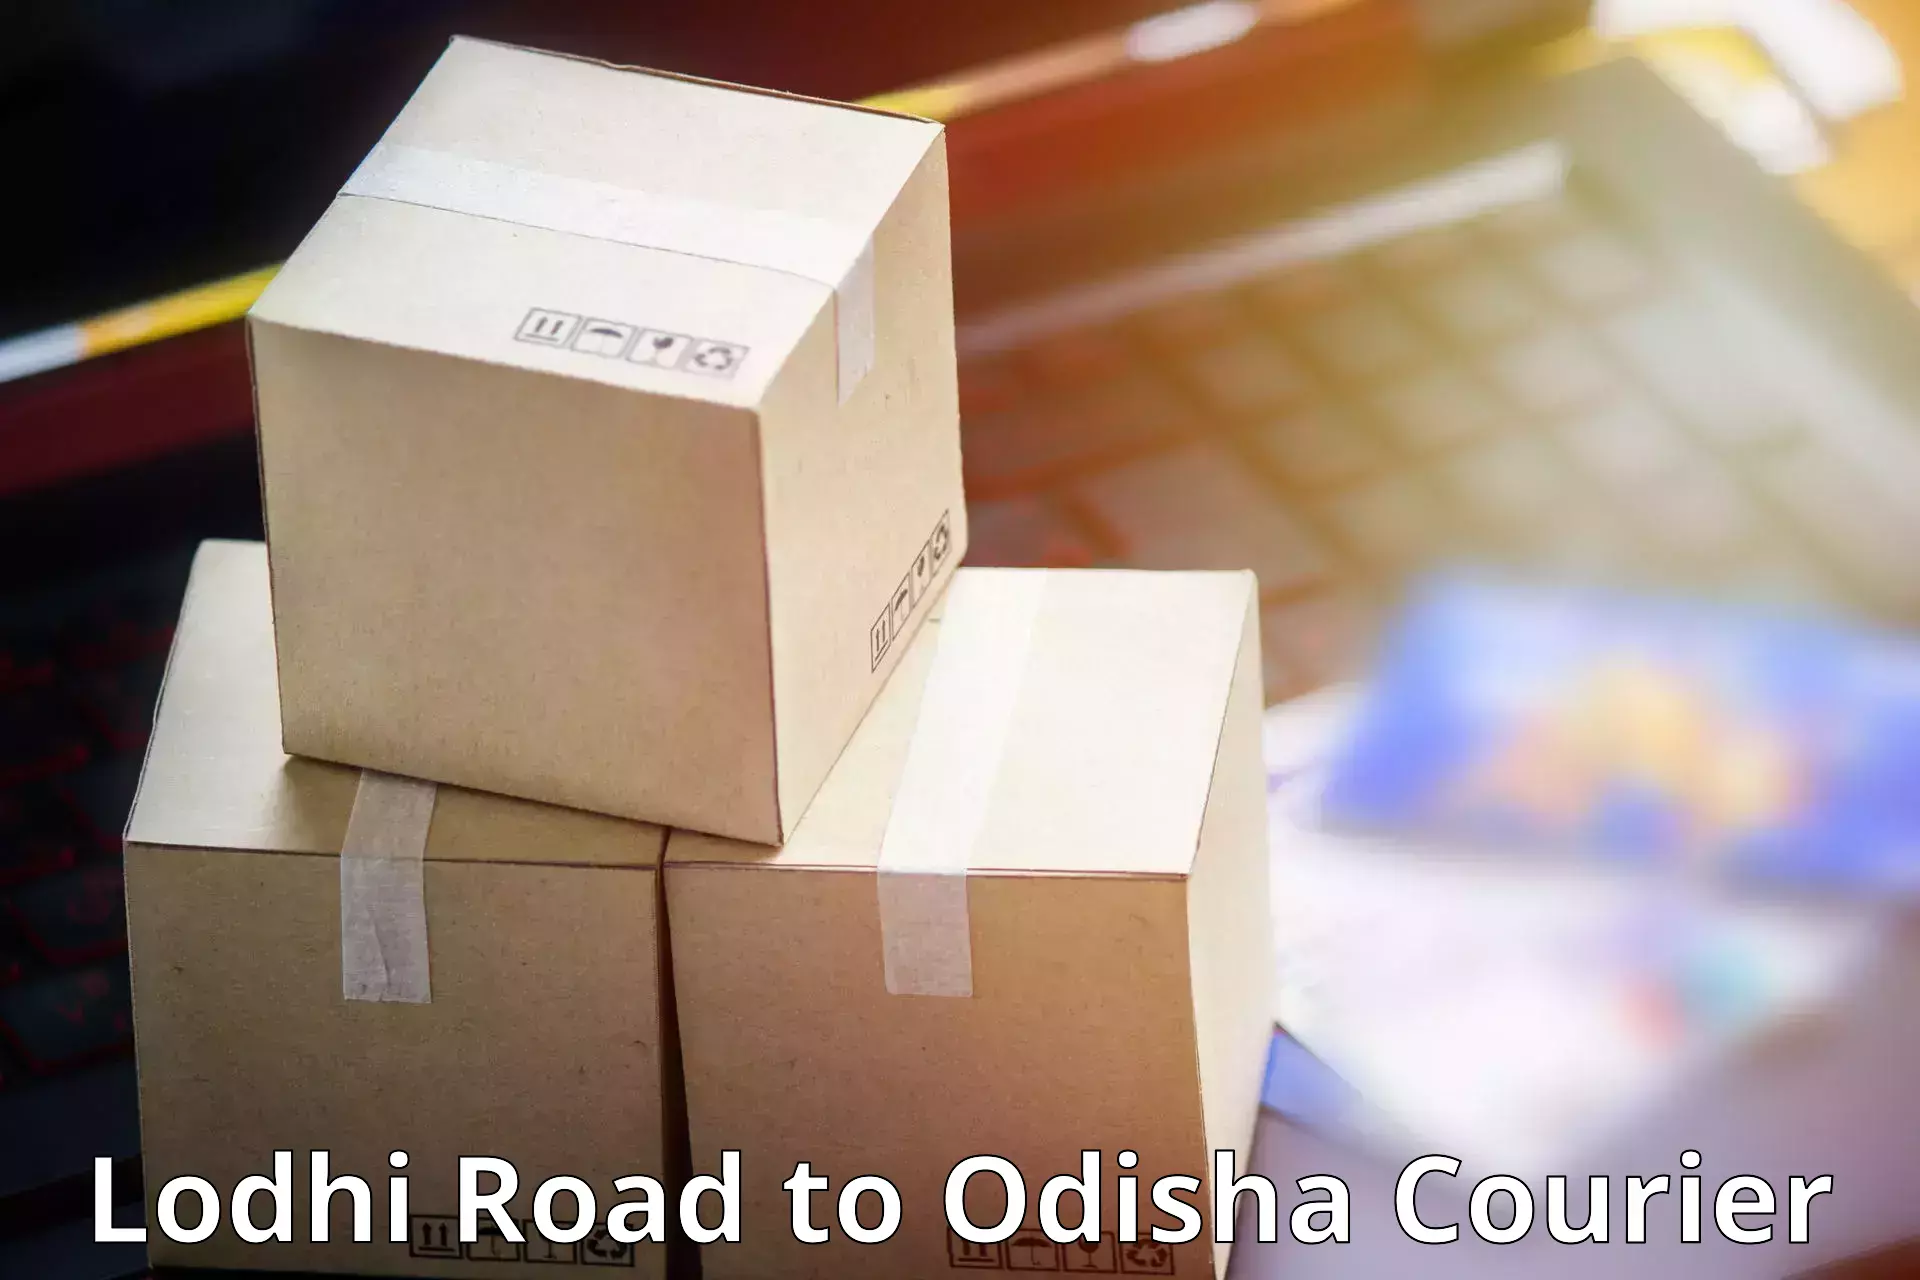 Next-generation courier services Lodhi Road to Barbil